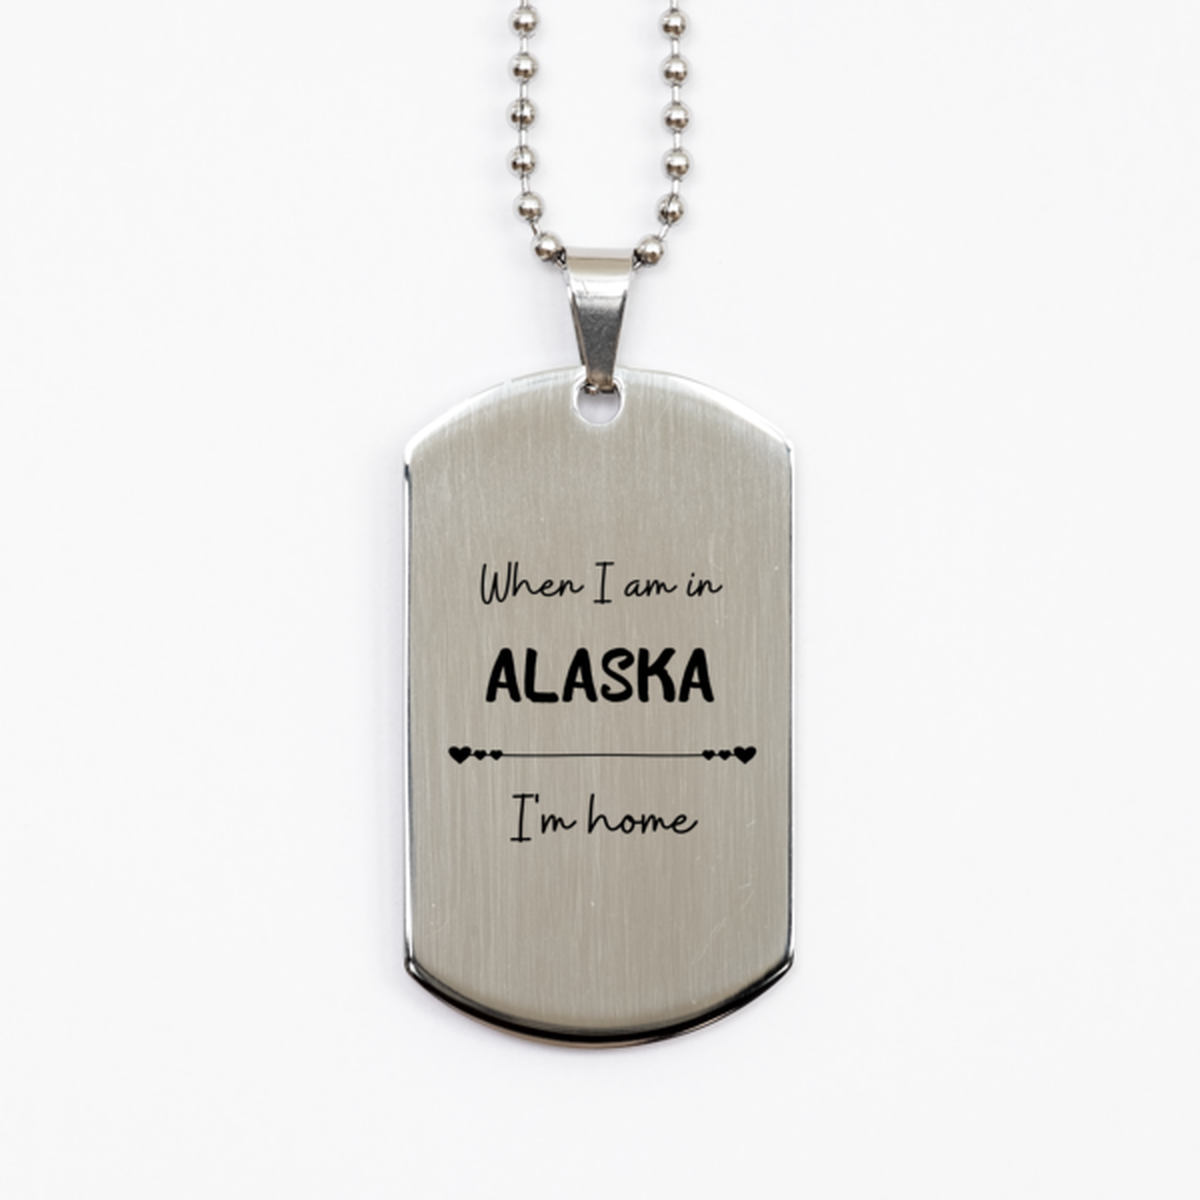 When I am in Alaska I'm home Silver Dog Tag, Cheap Gifts For Alaska, State Alaska Birthday Gifts for Friends Coworker